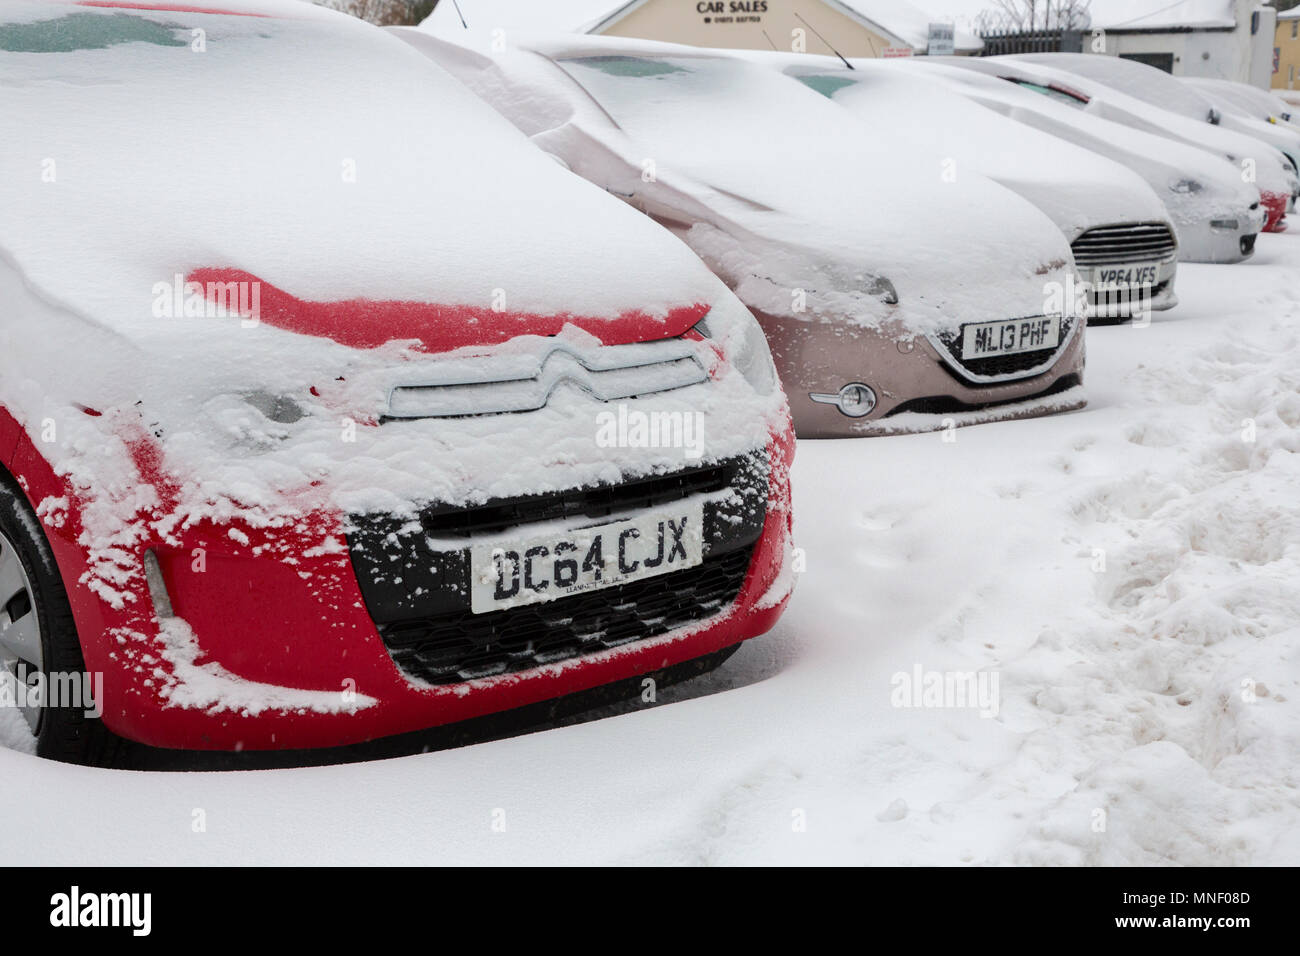 Cars for sale in showroom forecourt covered in snow, Llanfoist. Abergavenny, Wales, UK Stock Photo